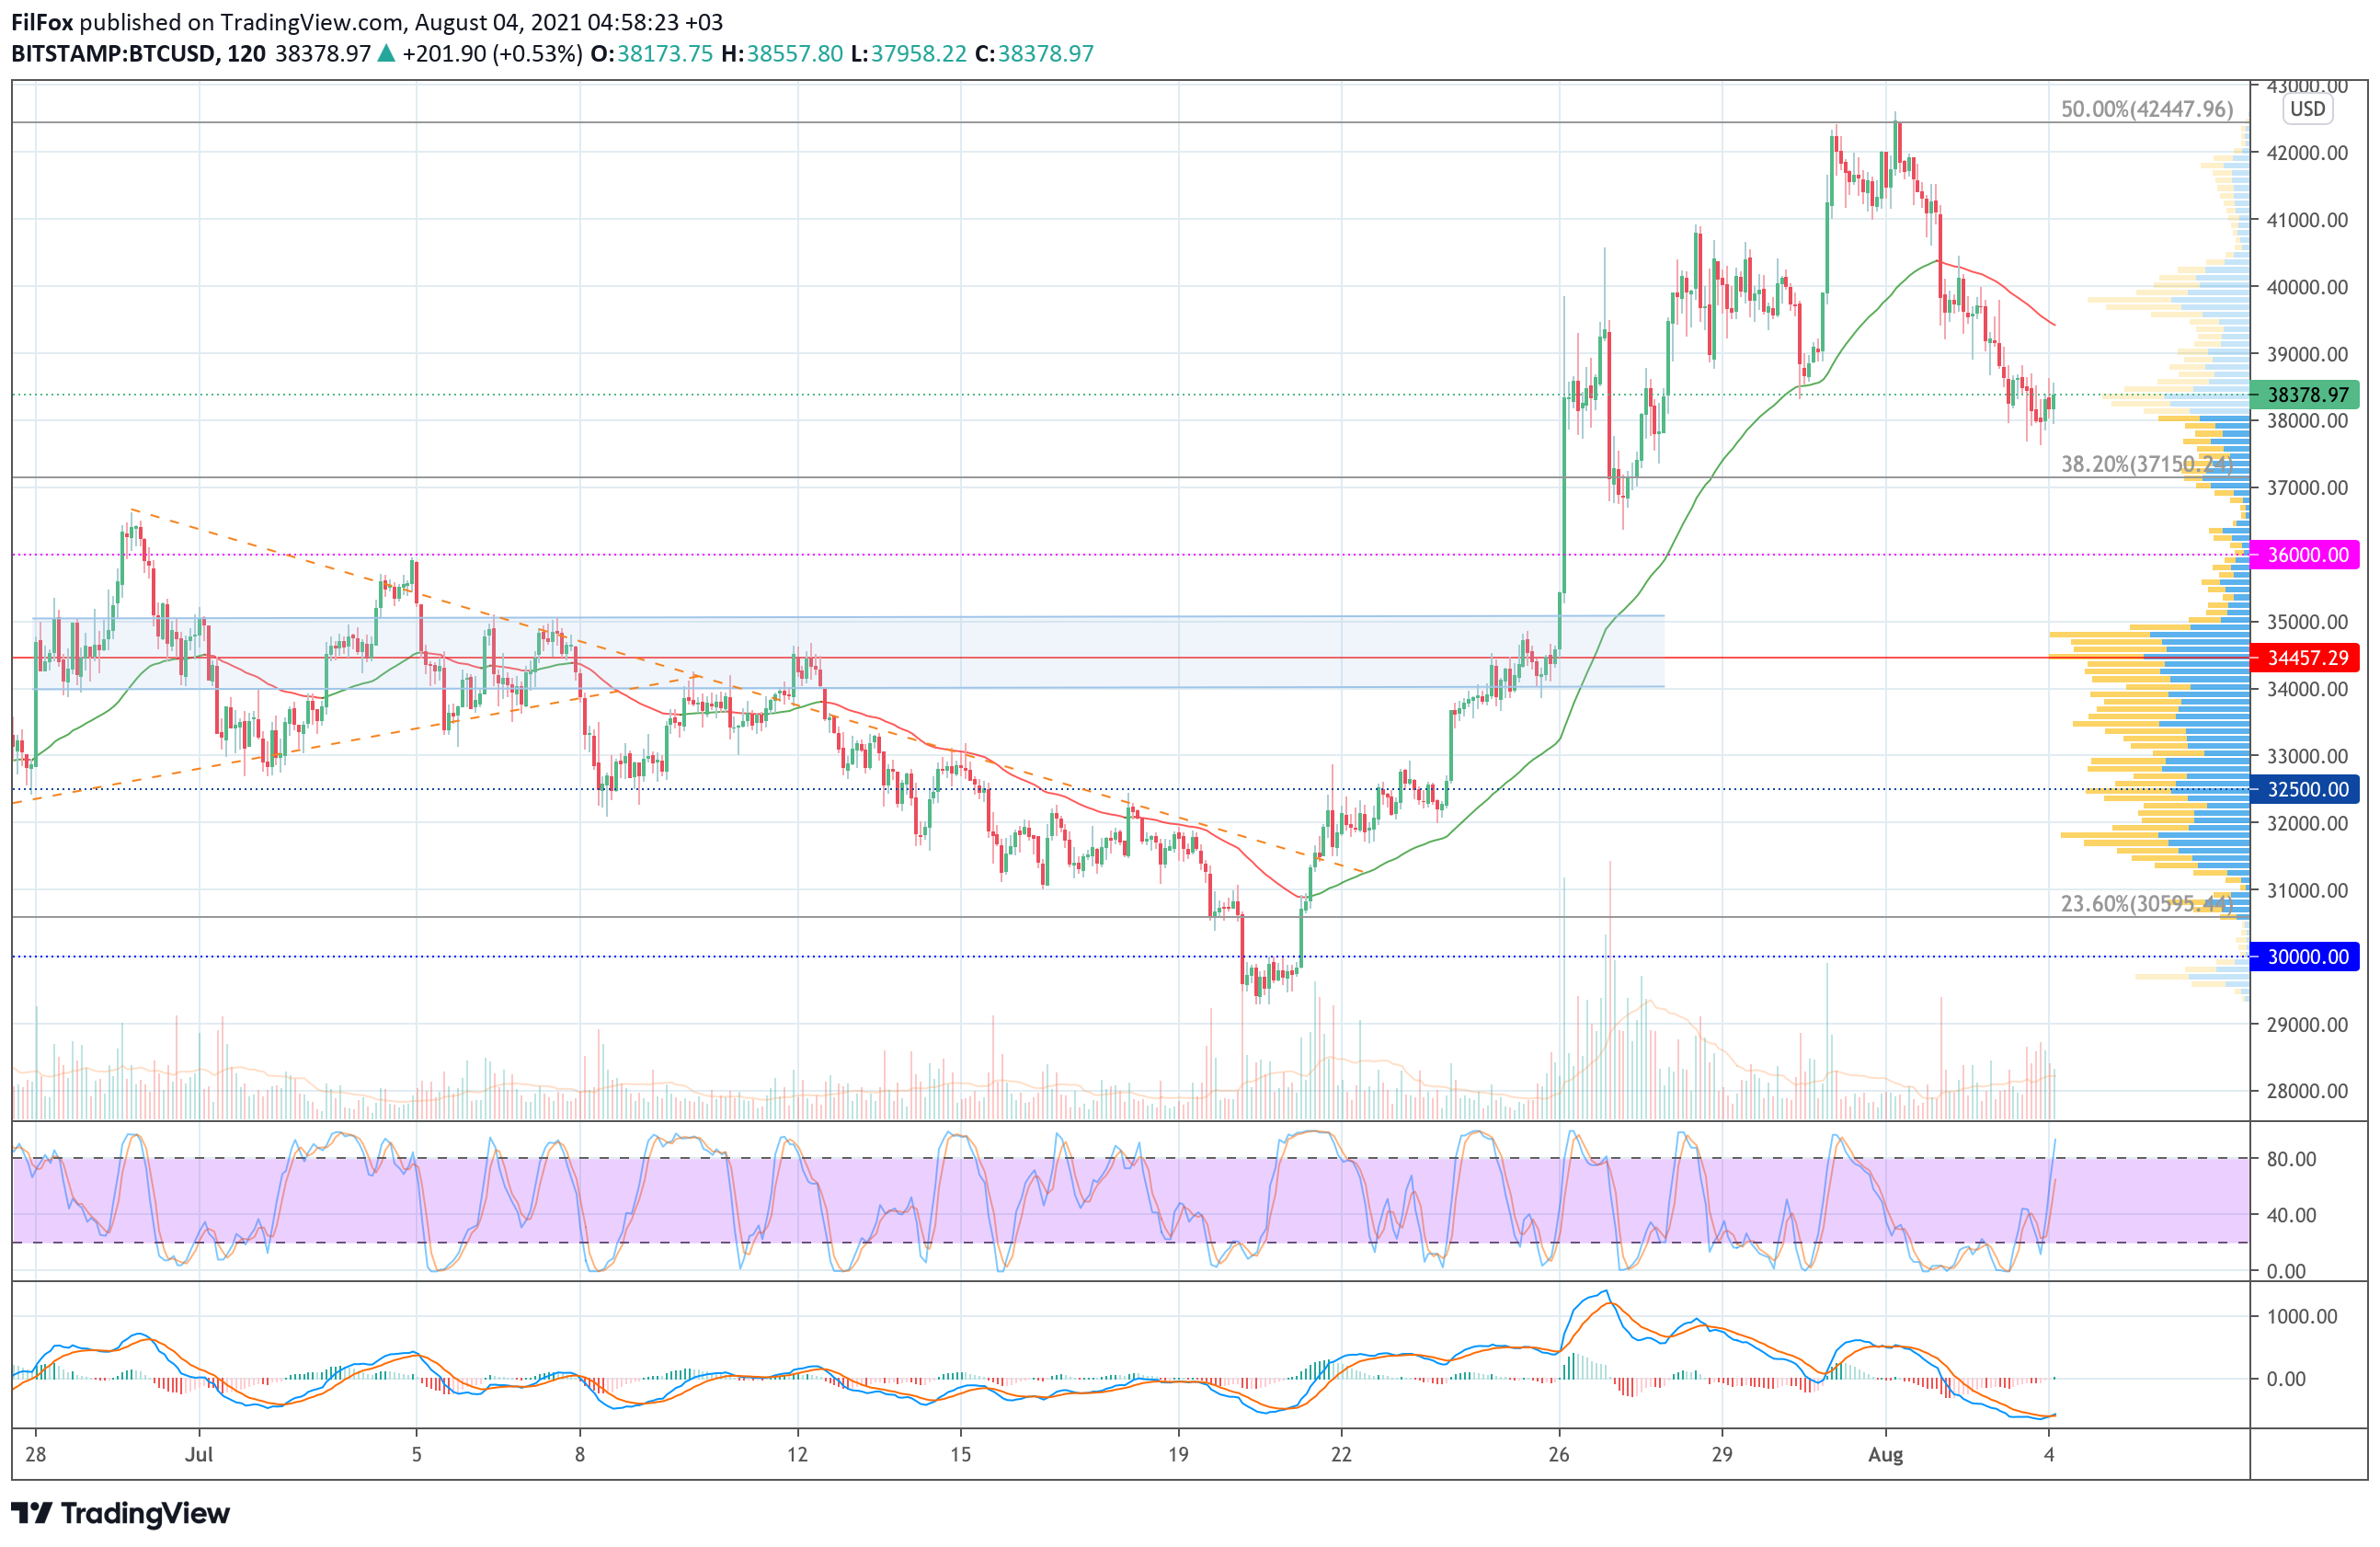 Analysis of prices for Bitcoin, Ethereum, XRP for 08/04/2021